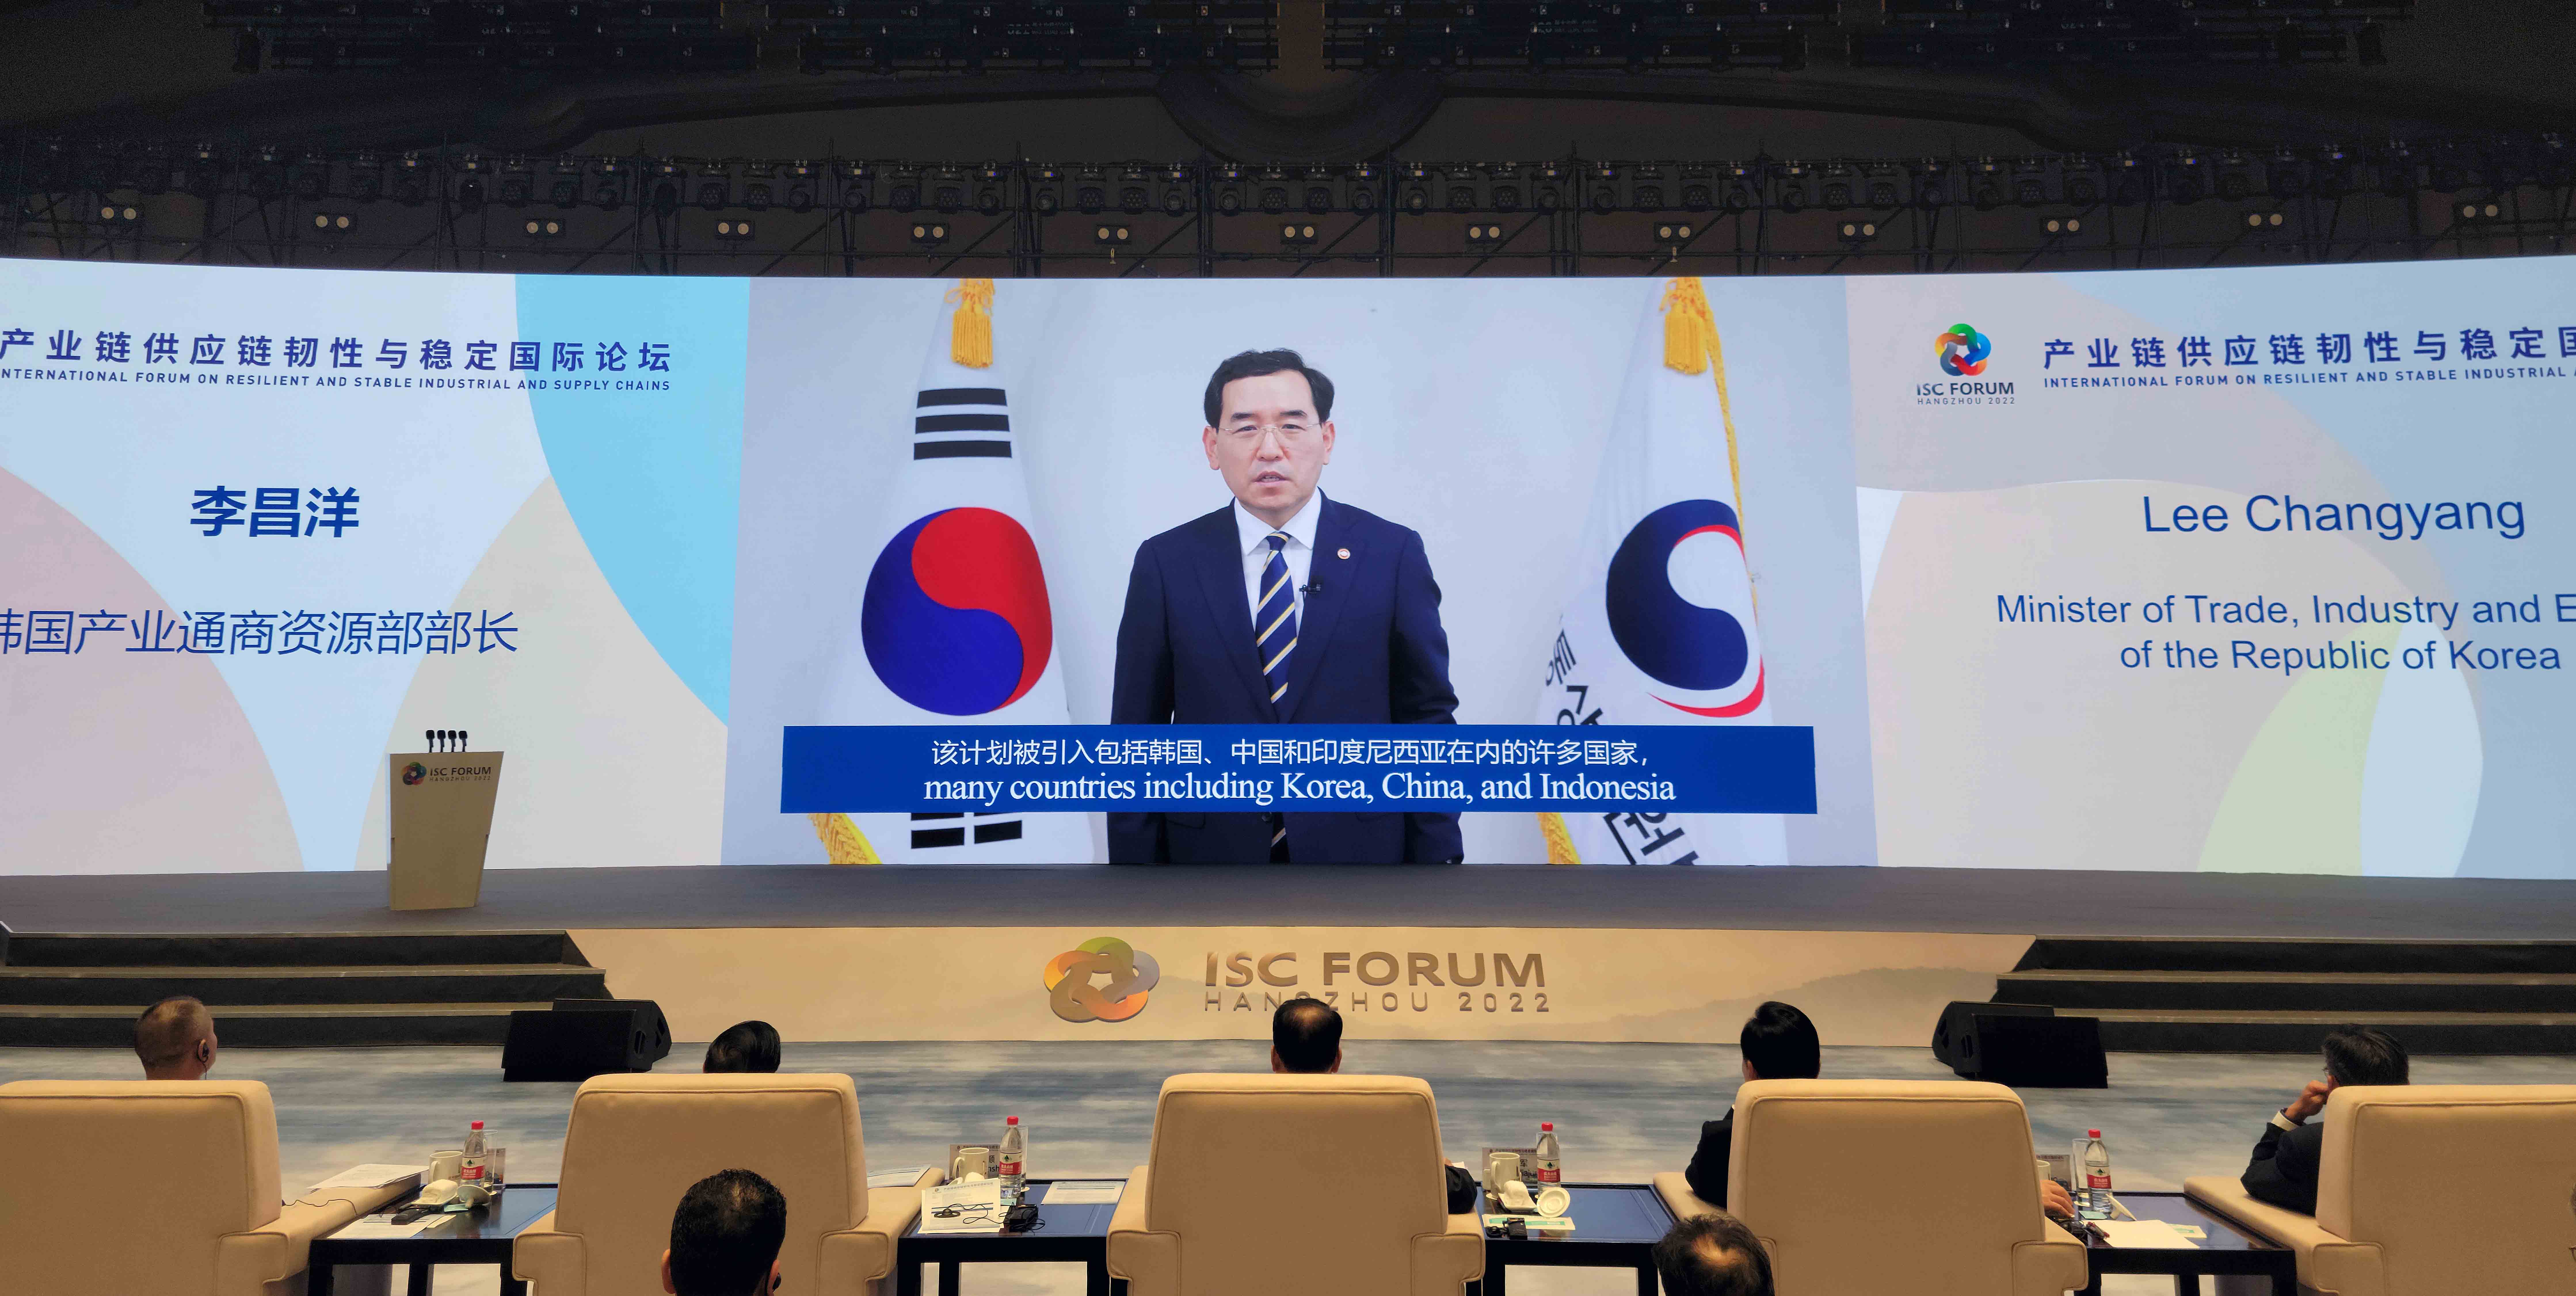 Minister attends International Forum on Resilient and Stable Industrial Supply Chains Image 0